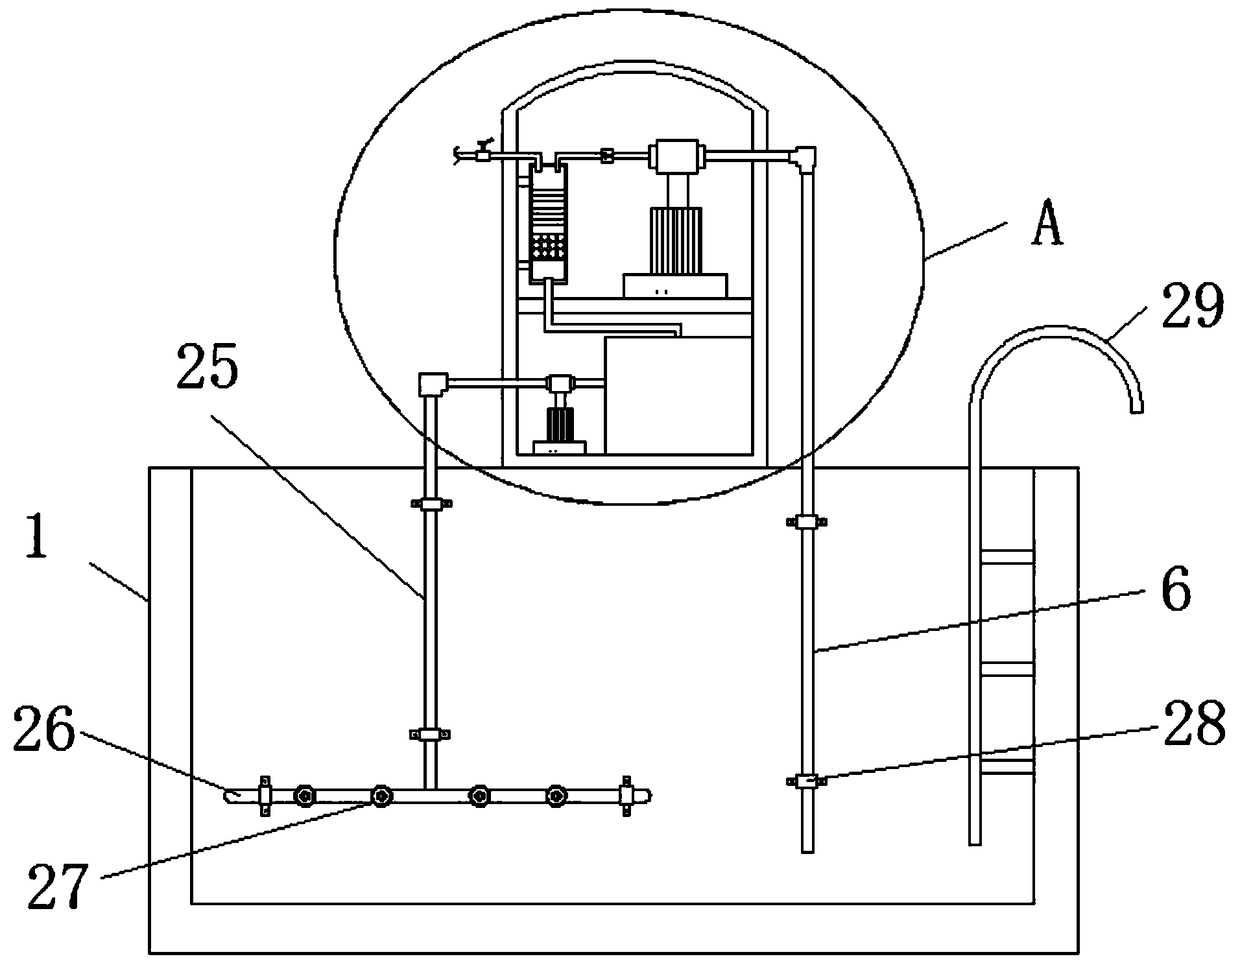 Large-scale flowing water hydrotherapy apparatus for medical treatment